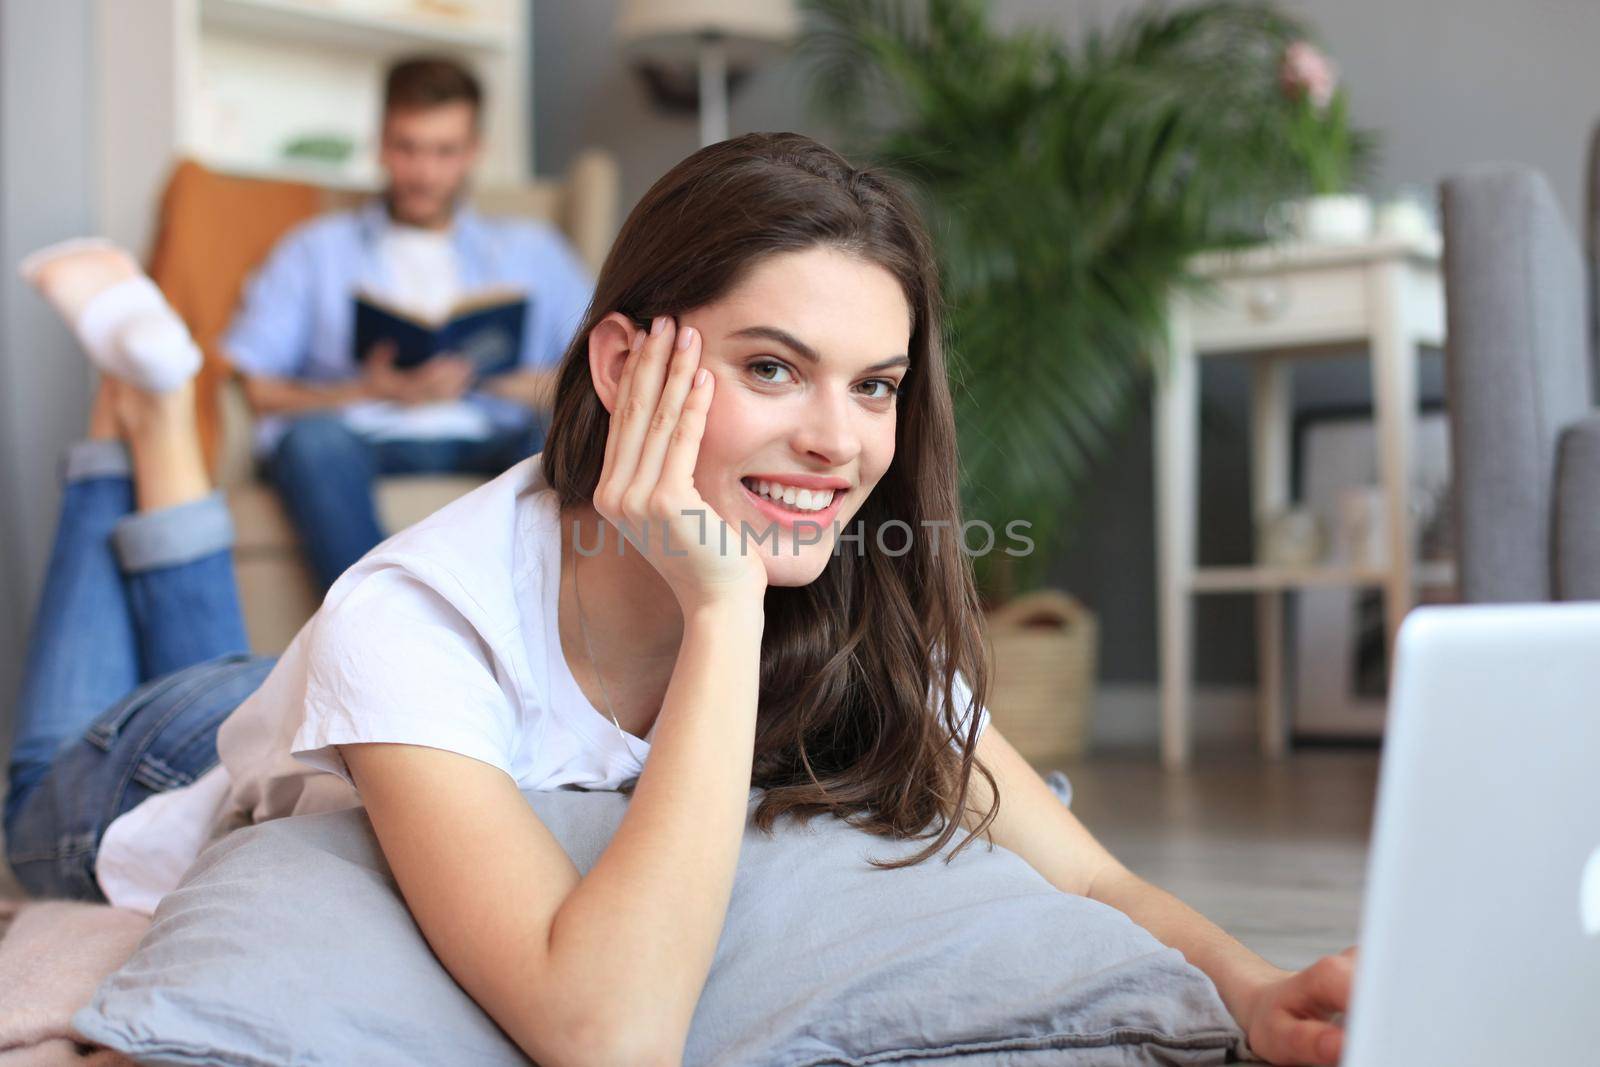 Smiling beautiful woman using laptop with blurred man in background at home